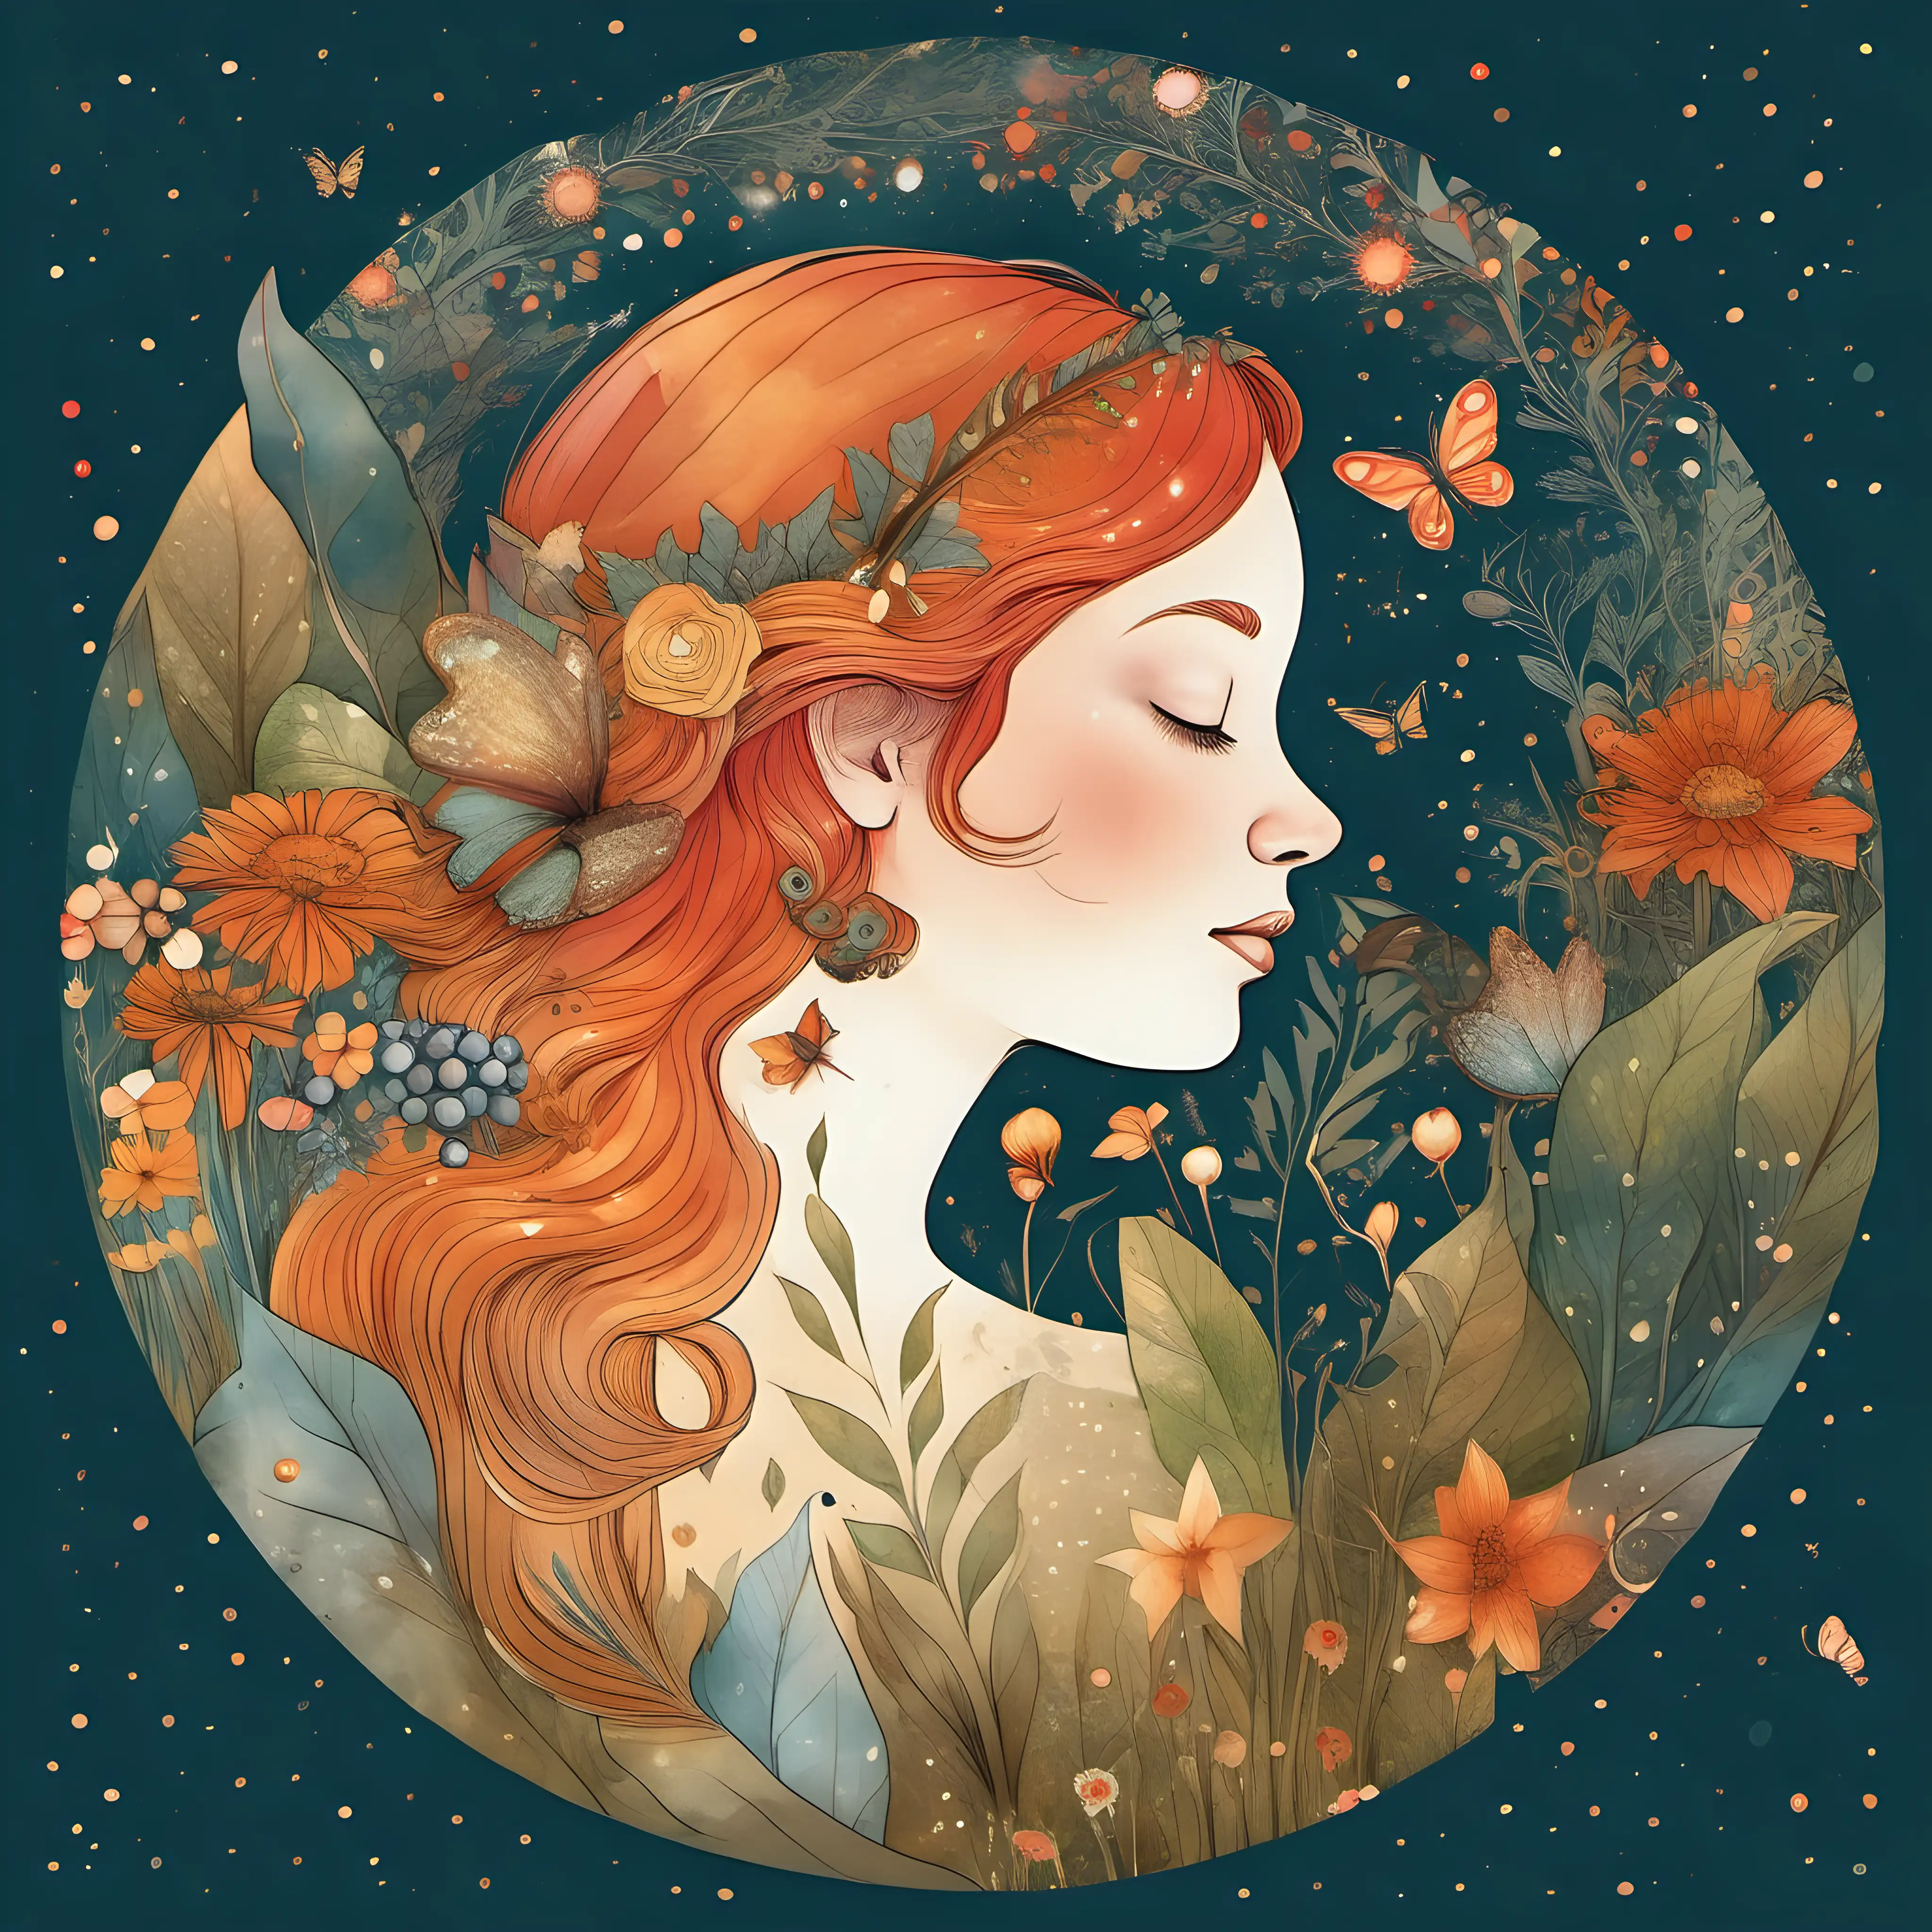 flat-illustration , composition in a circle, fairy girl in profile with closed eyes and smiling, around plants, berries, butterfly, snail, flowers, sequins, radiance, magic, texture of watercolor paper, warm colors, no volume linear drawing, william morris style